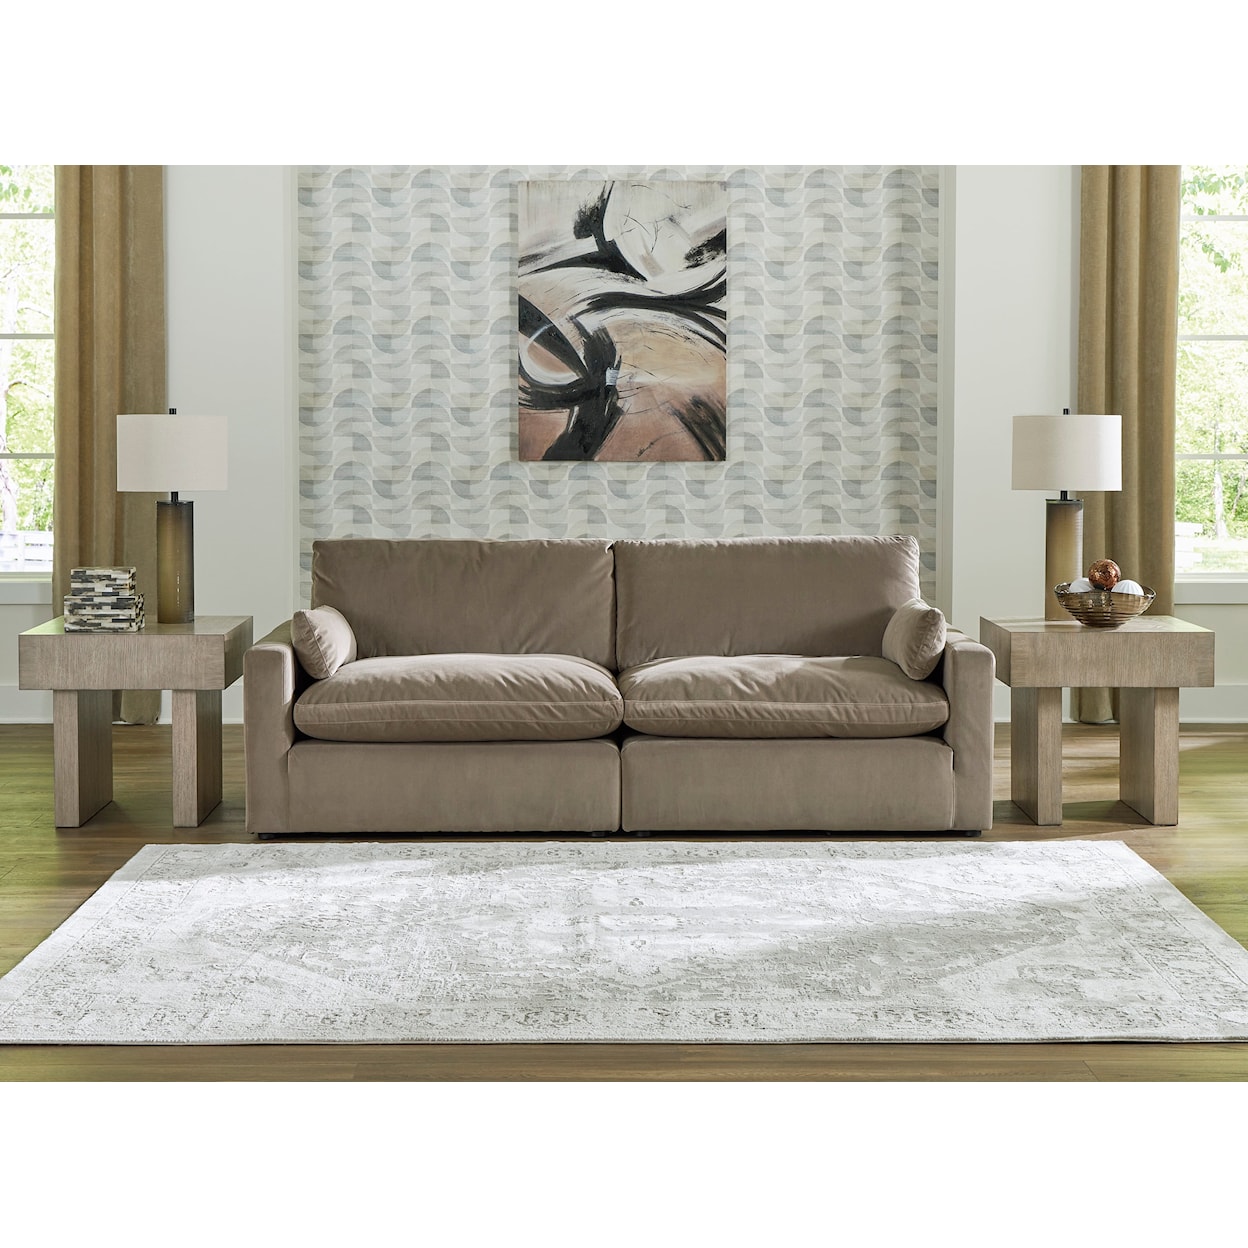 Signature Design by Ashley Furniture Sophie 2-Piece Sectional Sofa